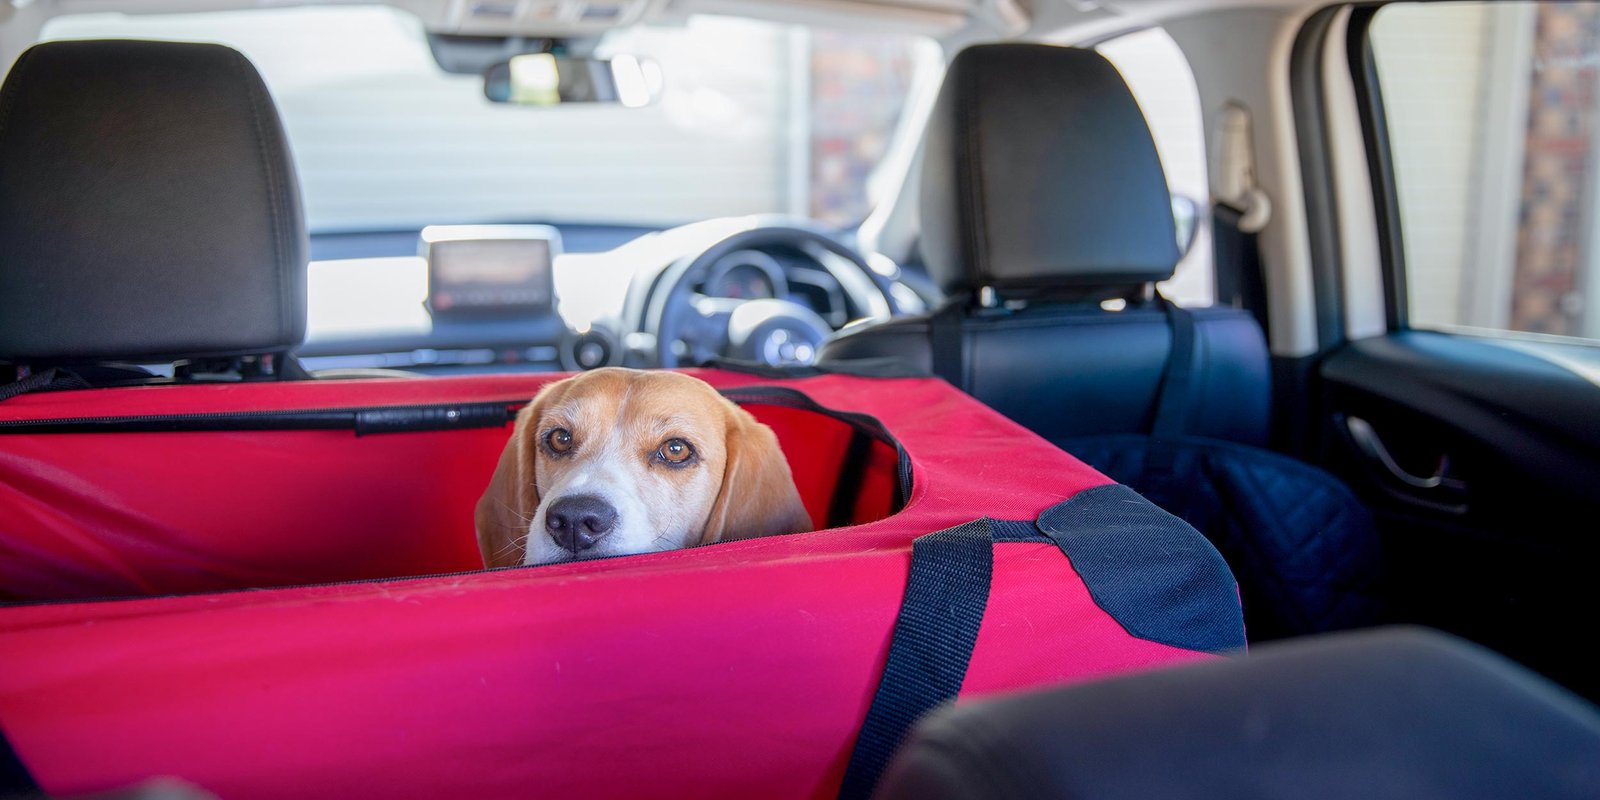 Best Way to Restrain a Dog in Your Car for Safety